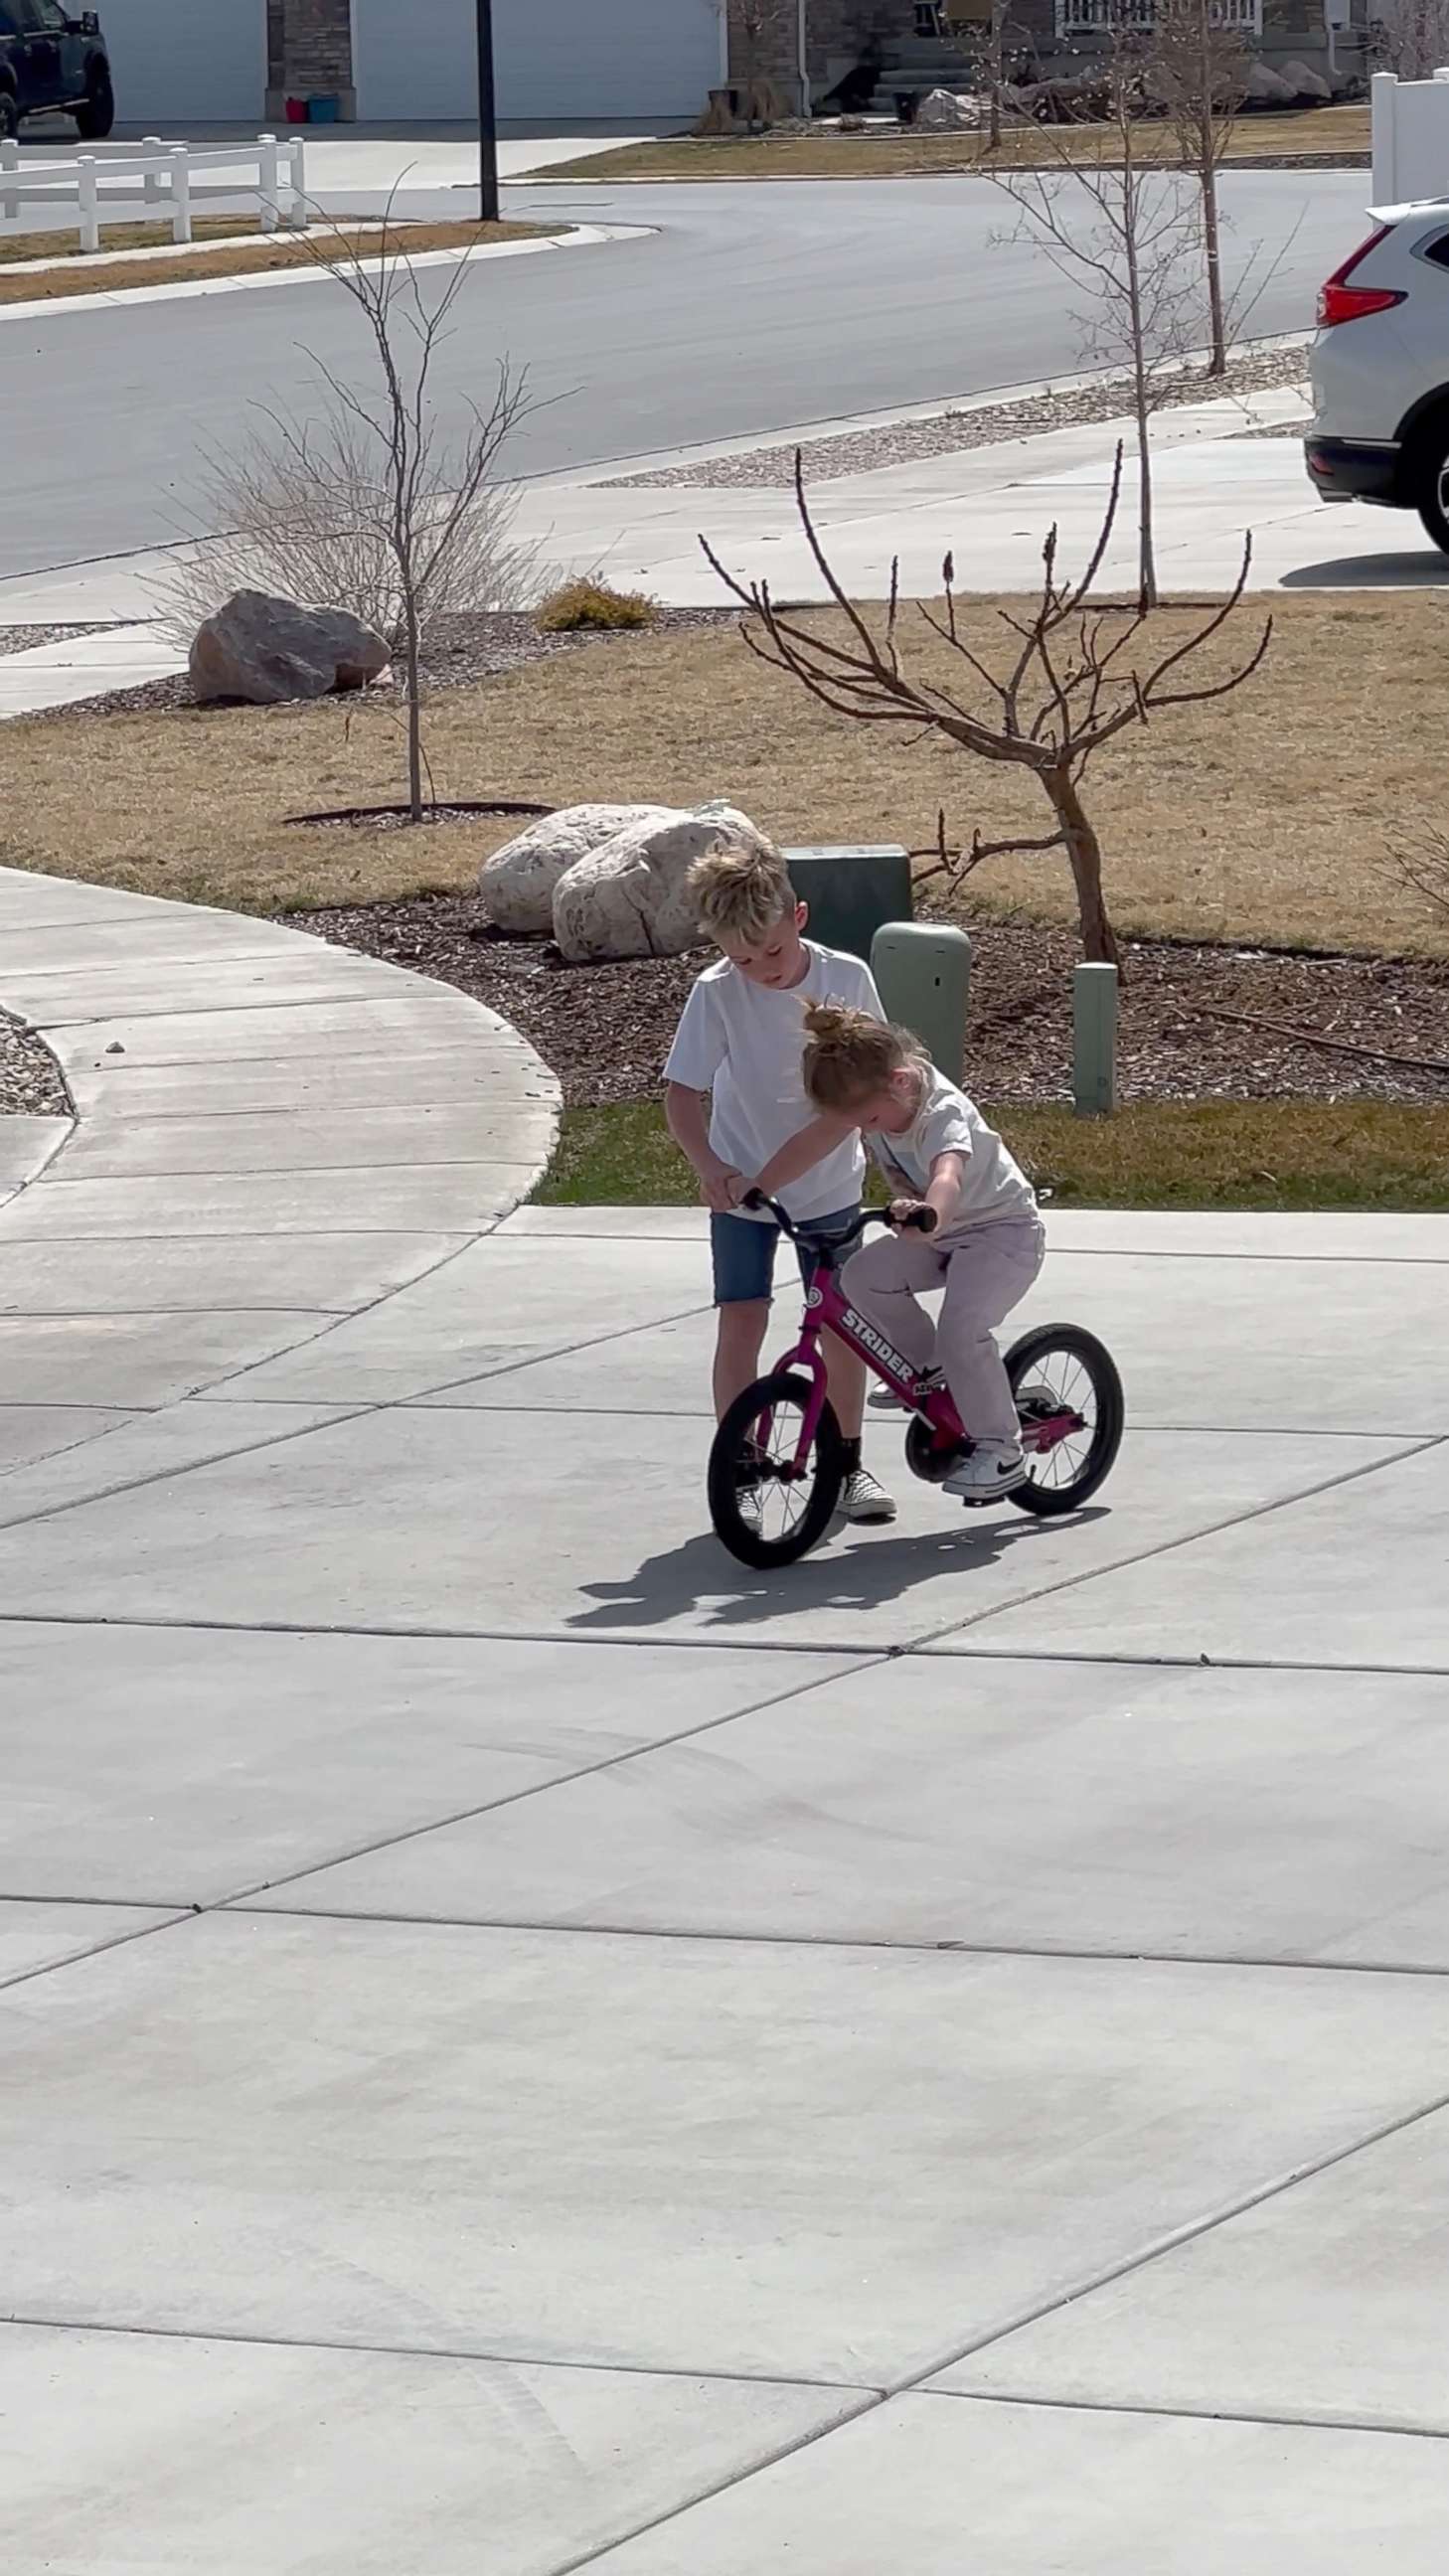 PHOTO: Mak helped his younger sister Judy learn how to ride her bicycle in March.